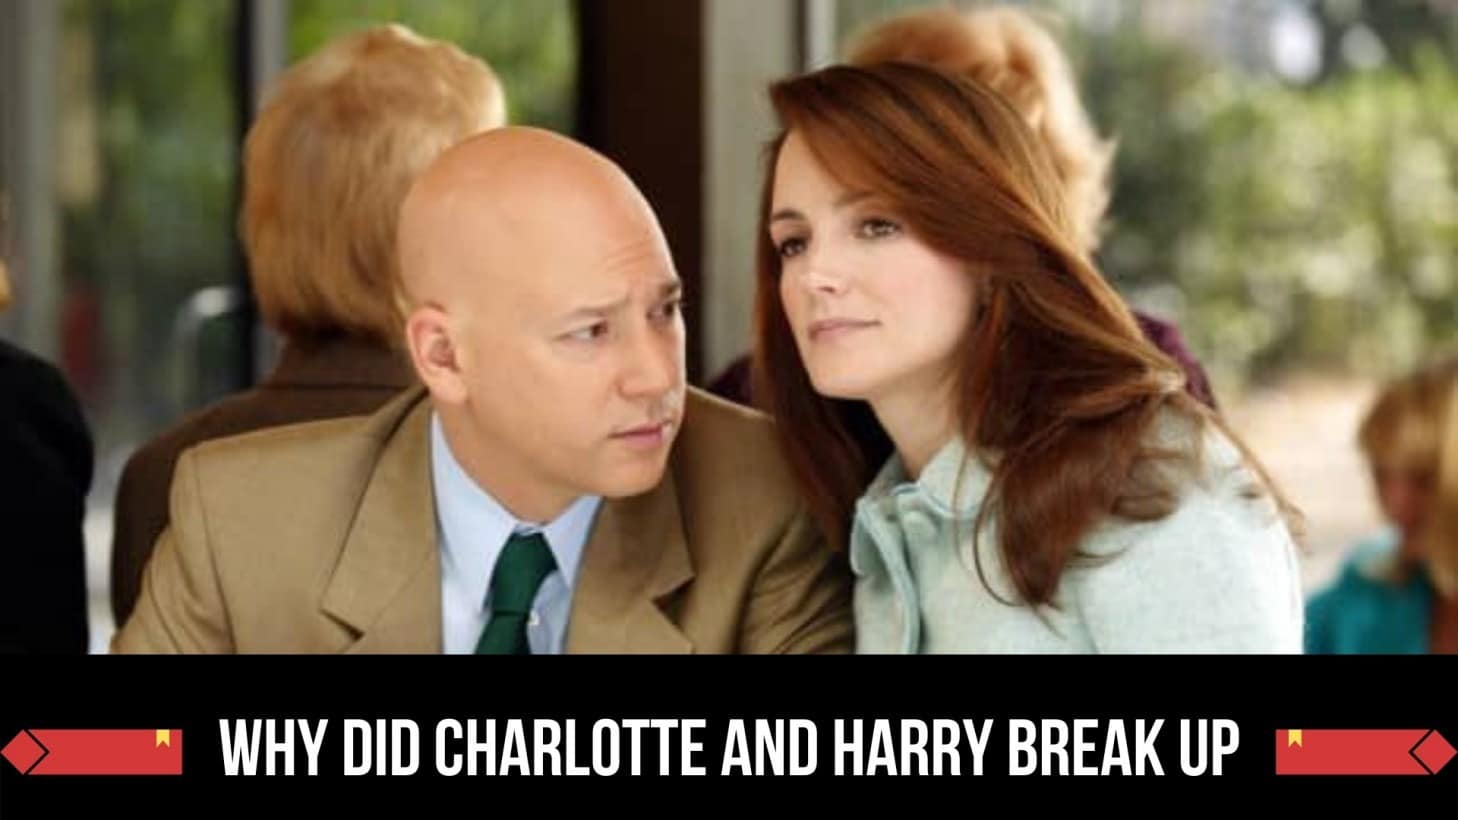 Why Did Charlotte And Harry Break Up And What Episode Does Harry Break Up With Charlotte?